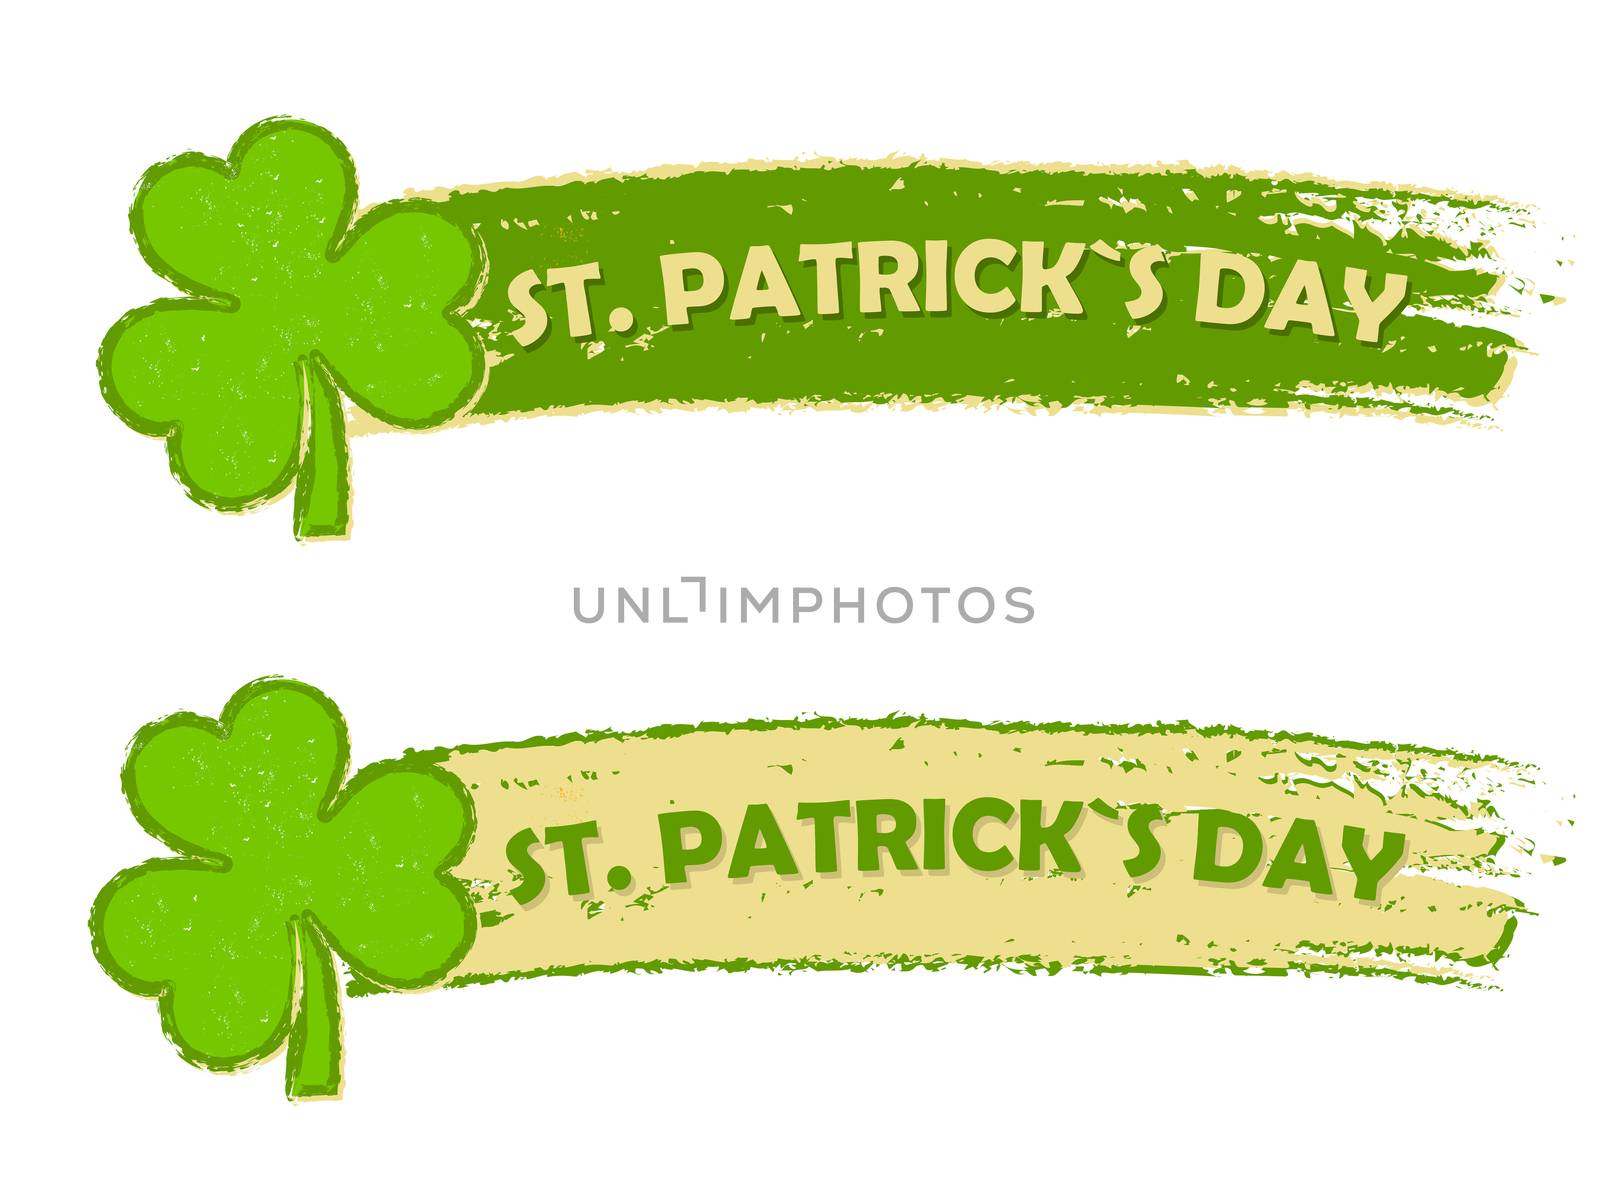 happy St. Patrick's day - text in two green drawn banners with three leaved shamrock symbols, holiday seasonal concept